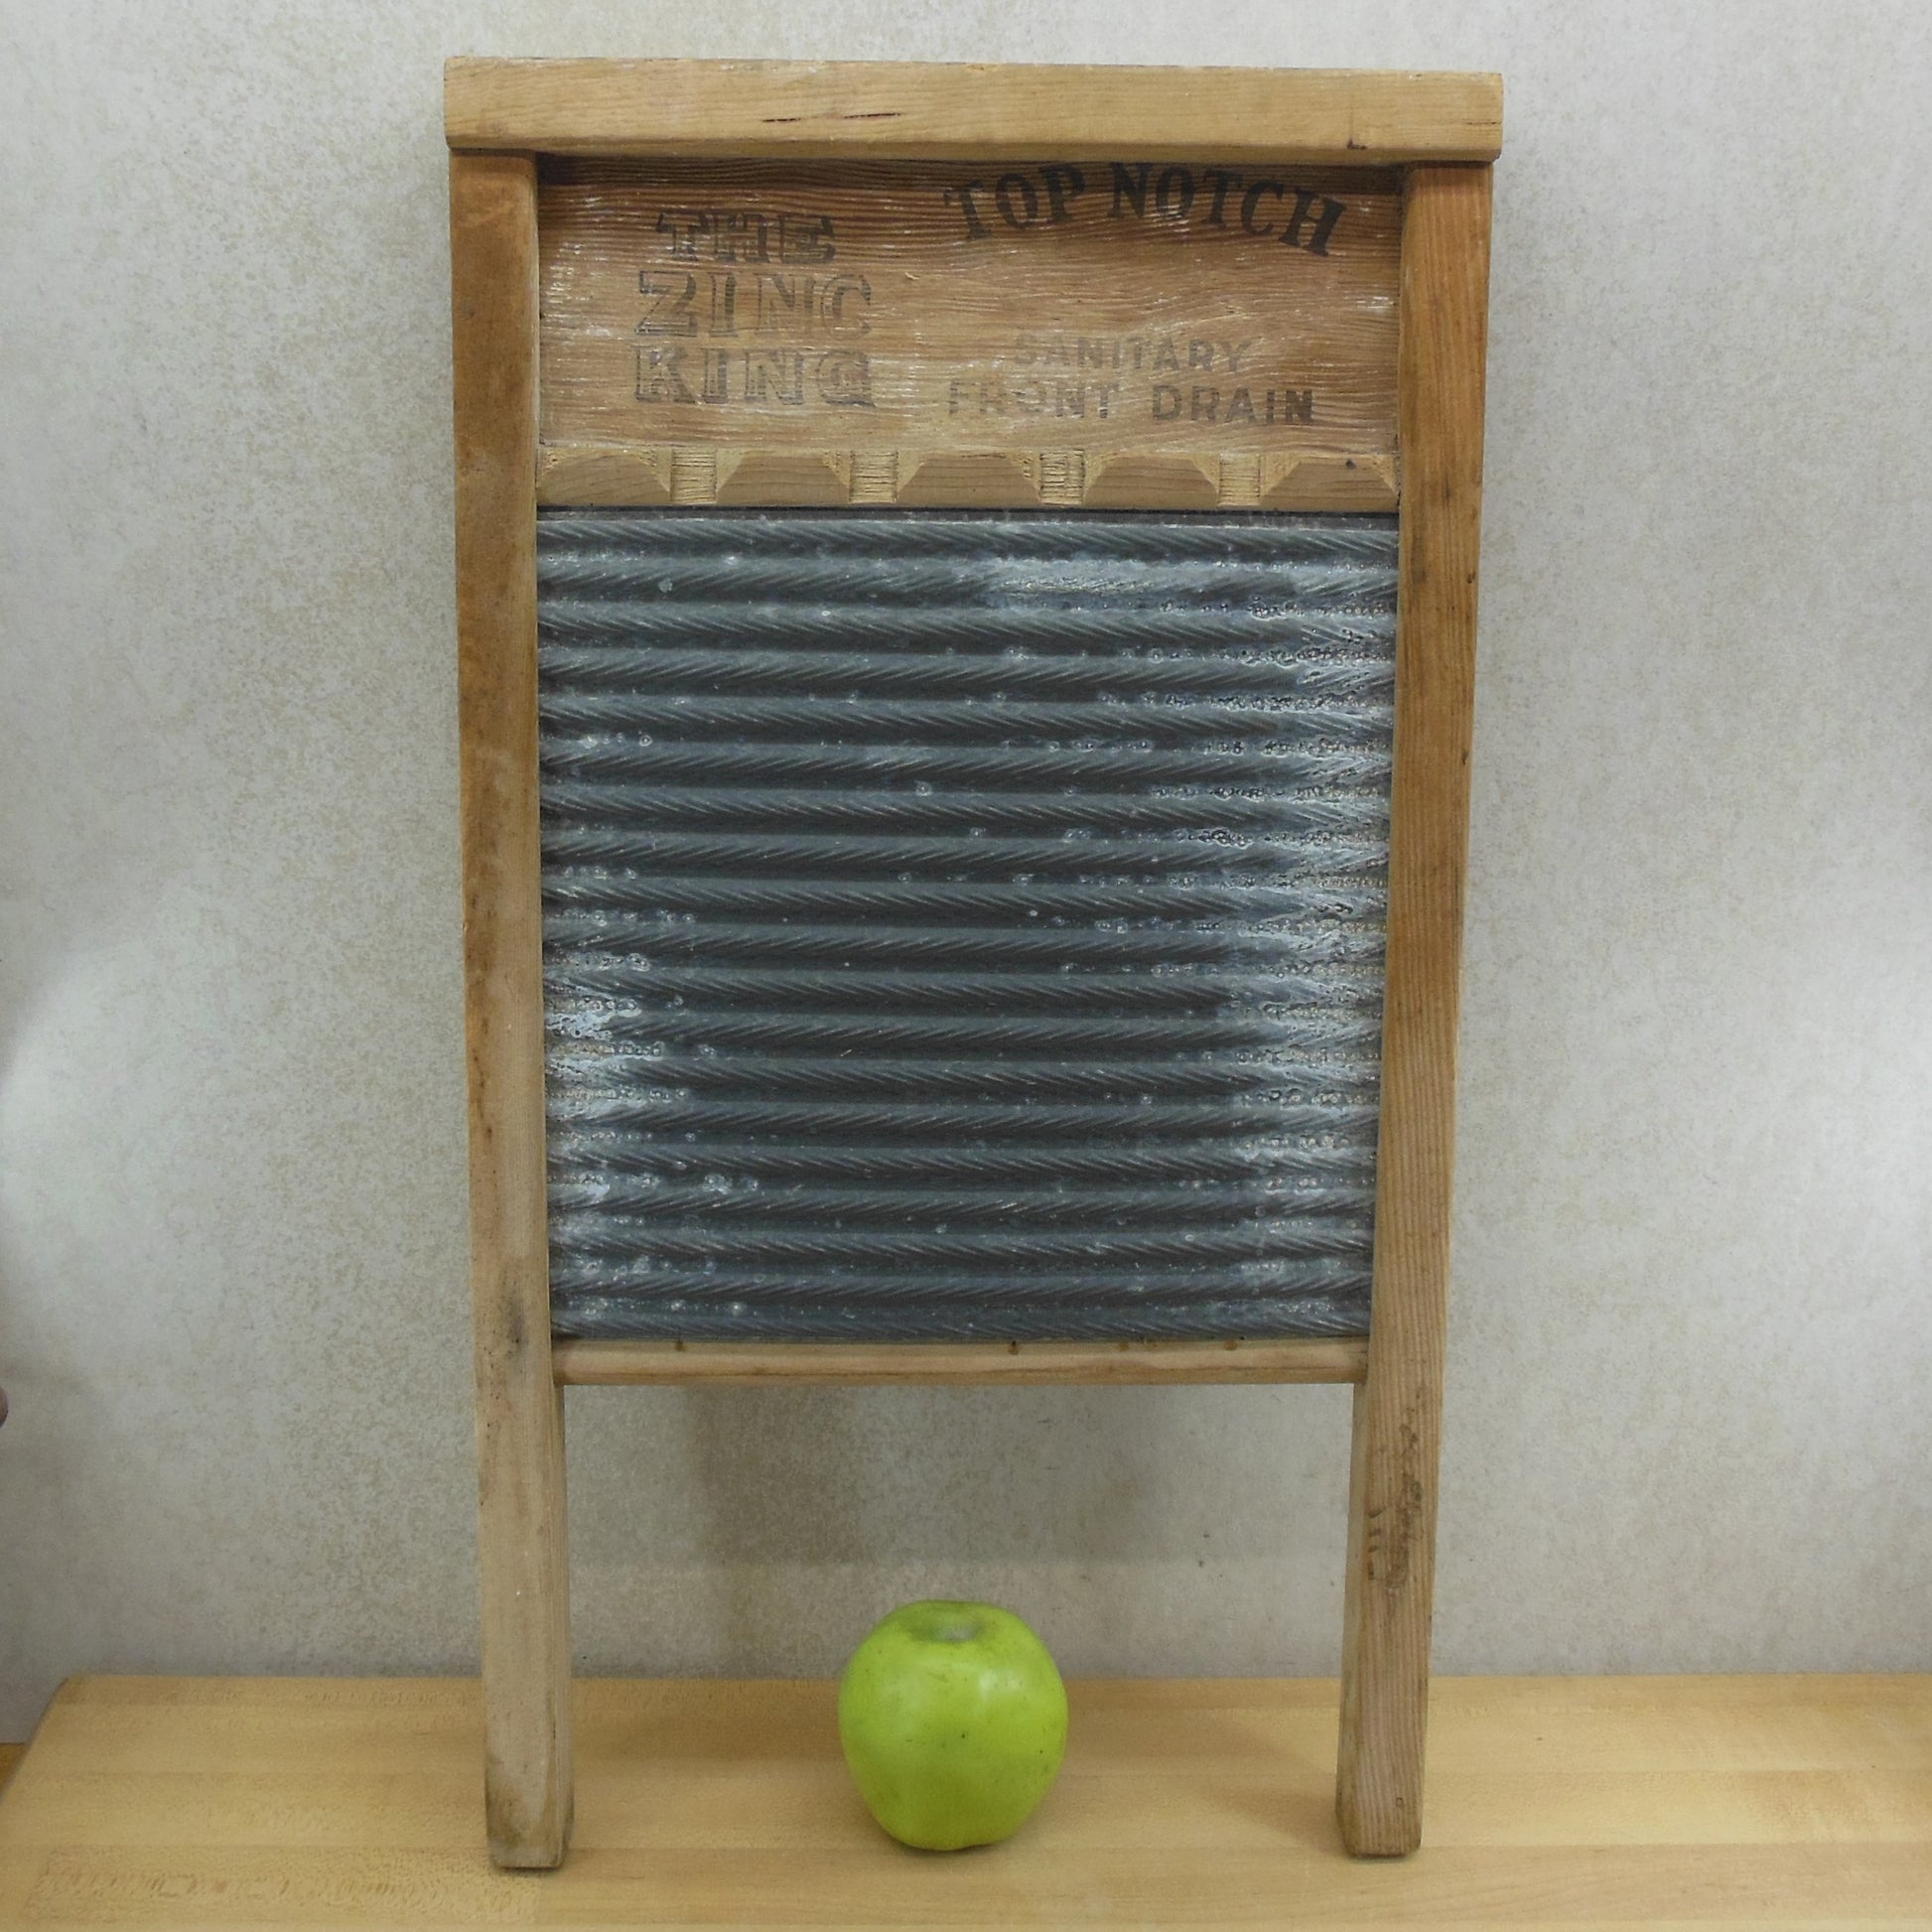 The National Washboard Co. No. 701 The Zinc King used